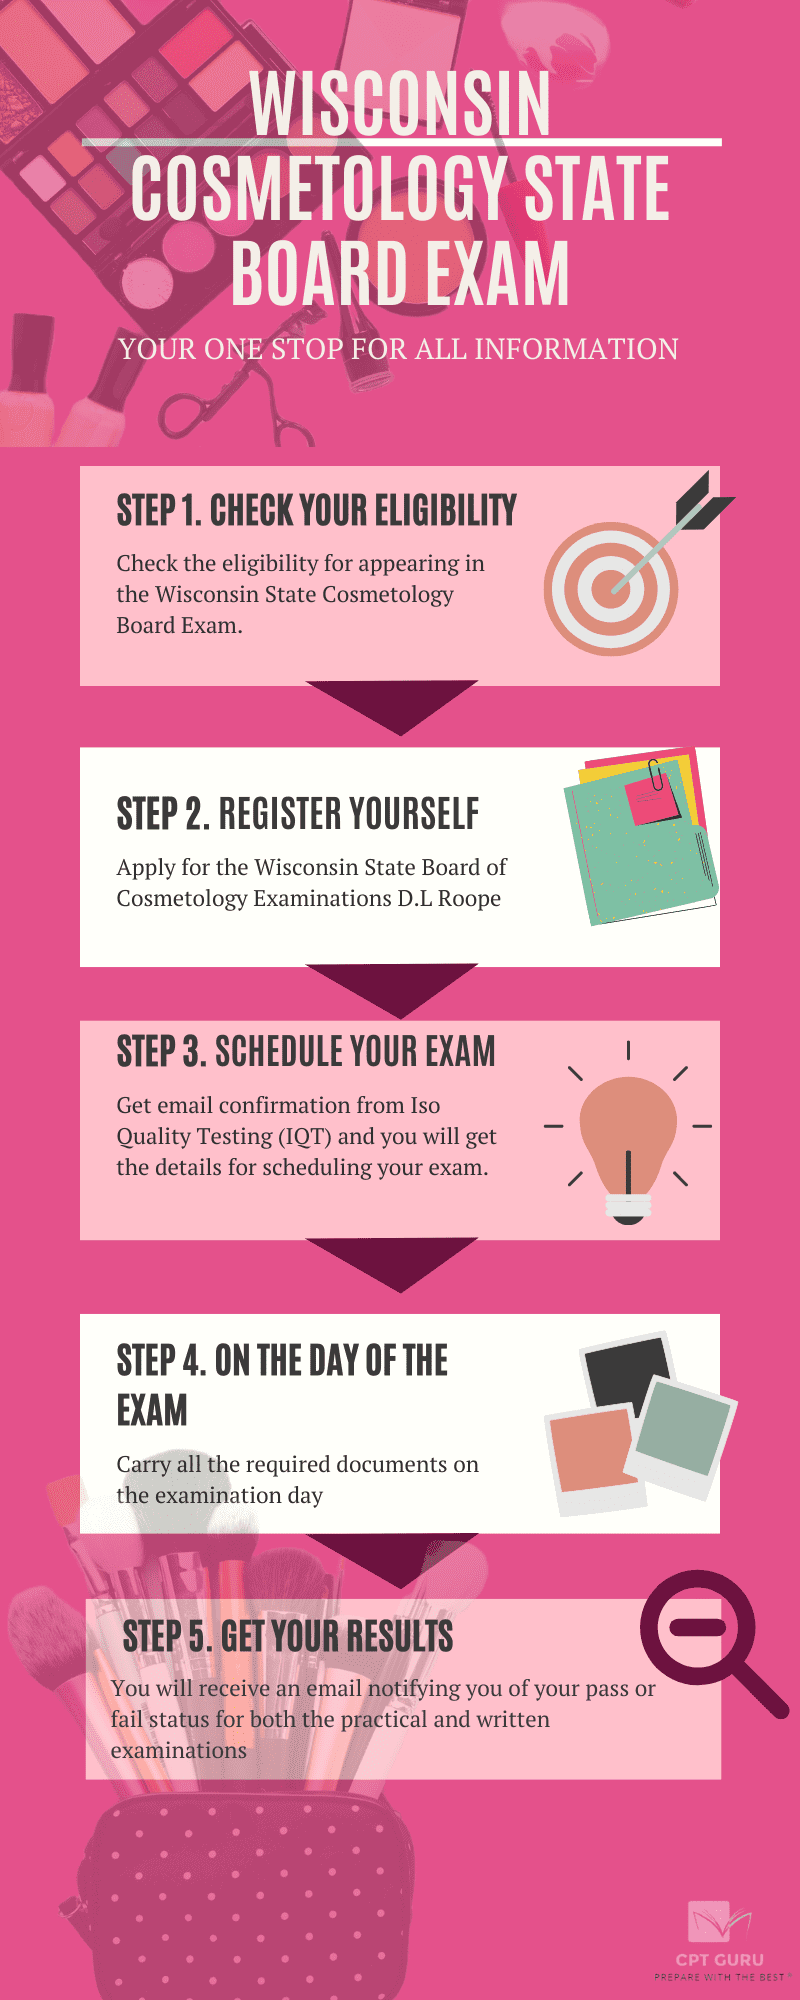 Wisconsin cosmetology state board exam: Free practice test, and everything you need to know